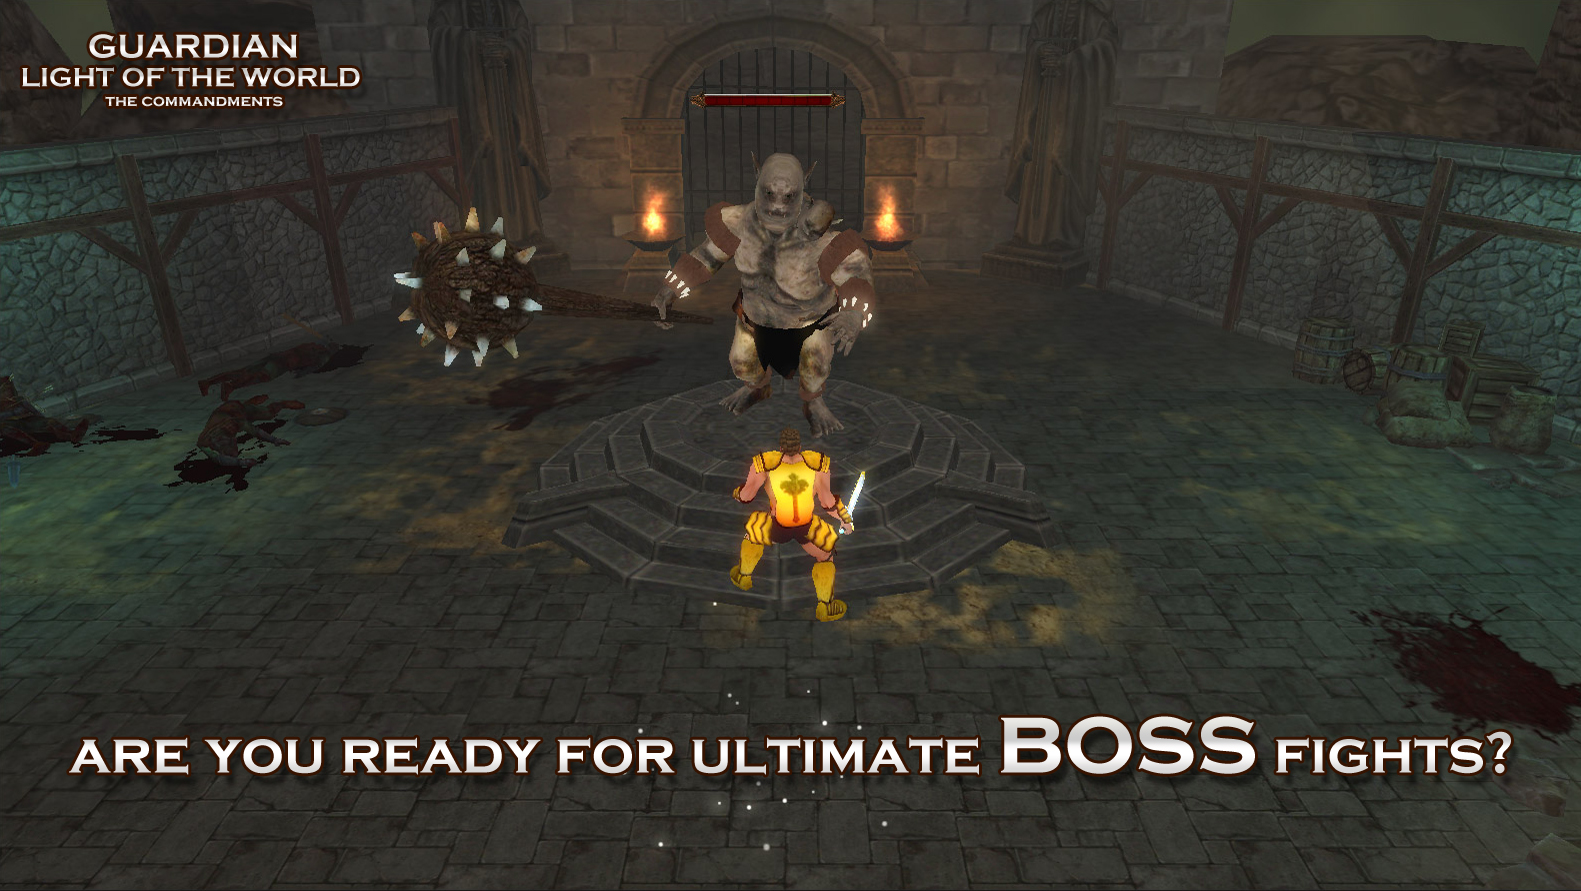 Guardian Facing Boss Monster in one of the Game Levels